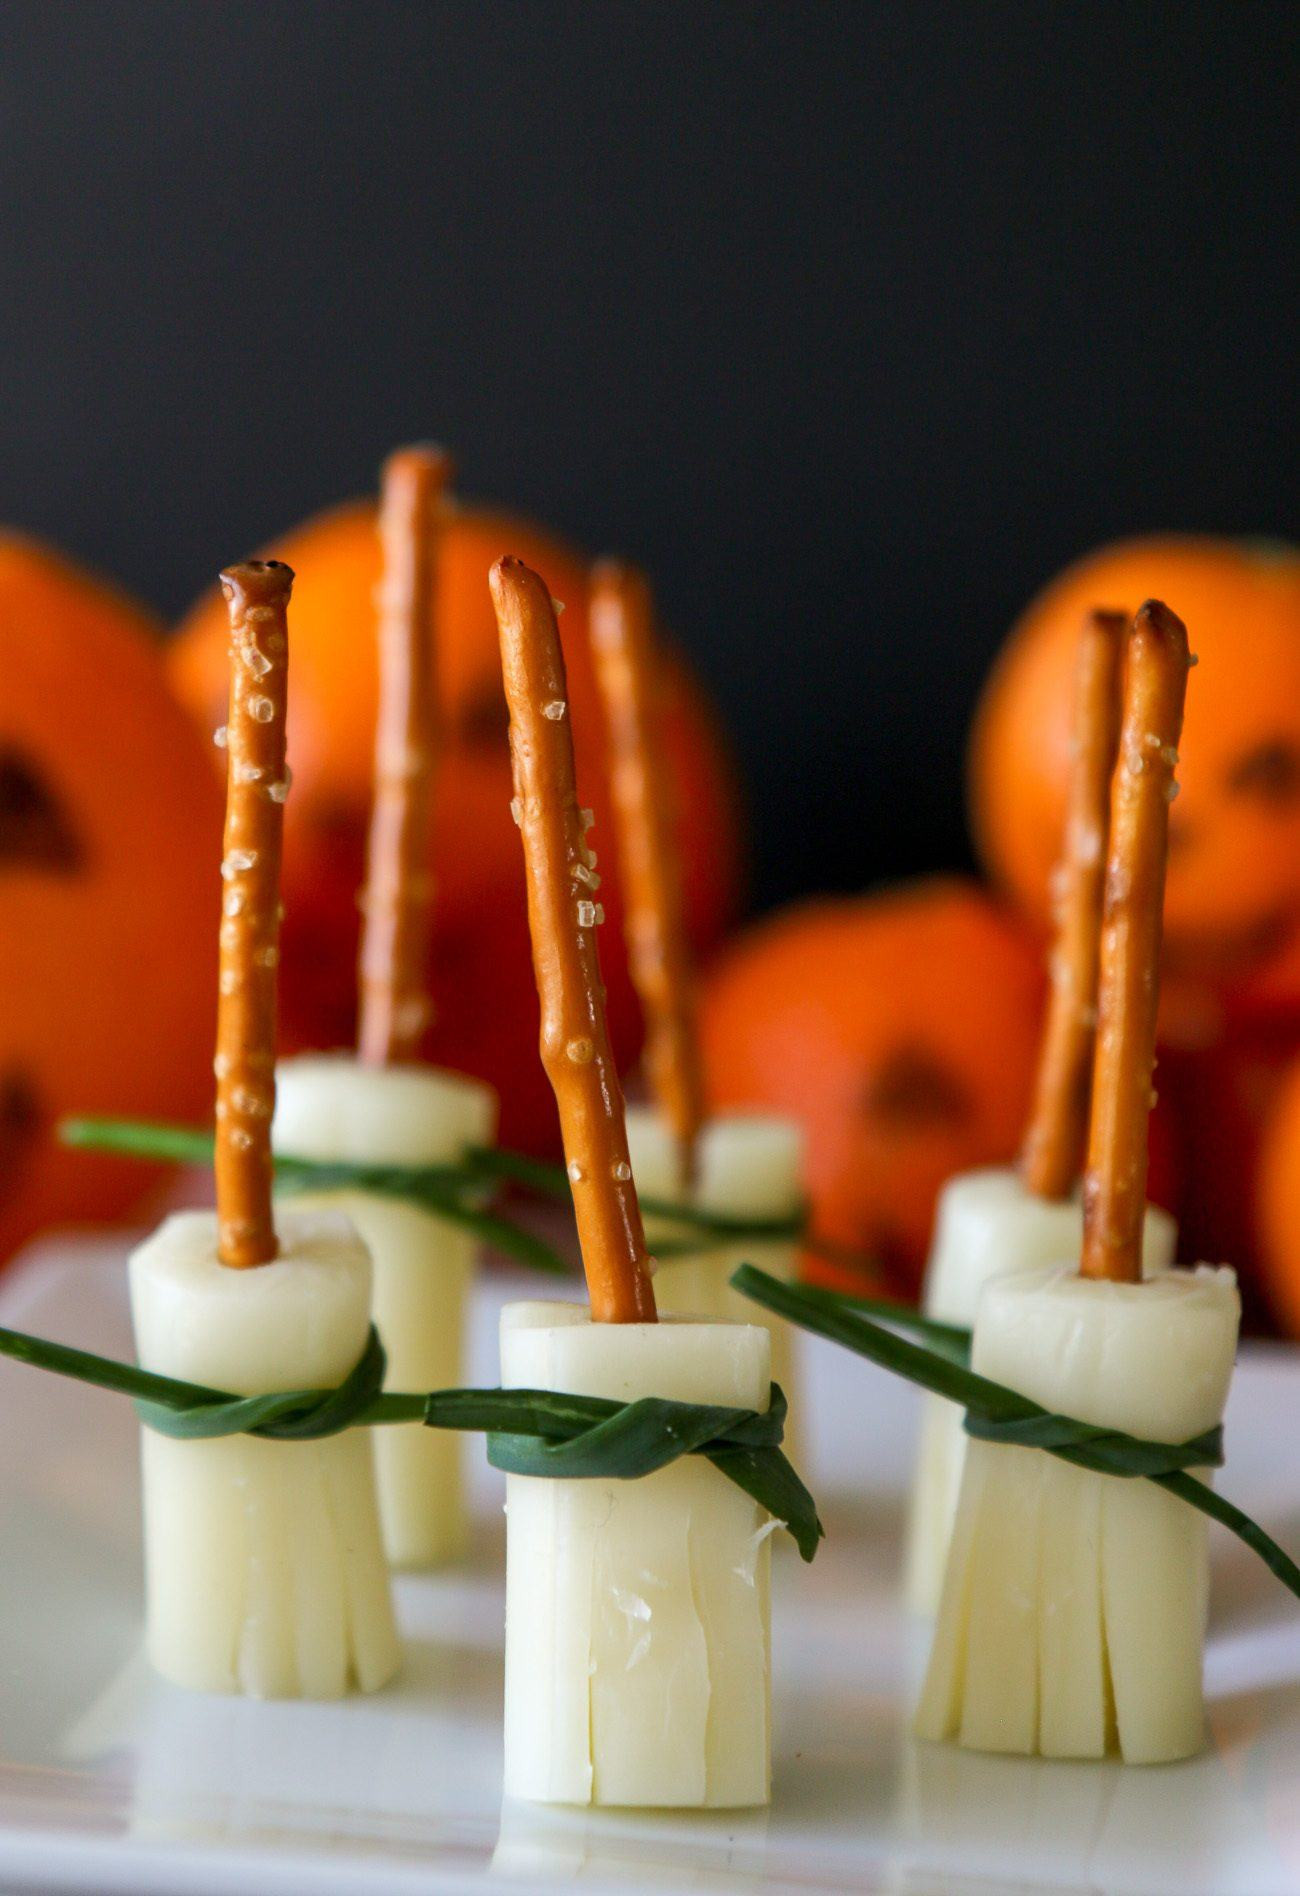 Halloween Kids Recipes
 5 Easy & Healthy Halloween Snacks for Kids Recipes They